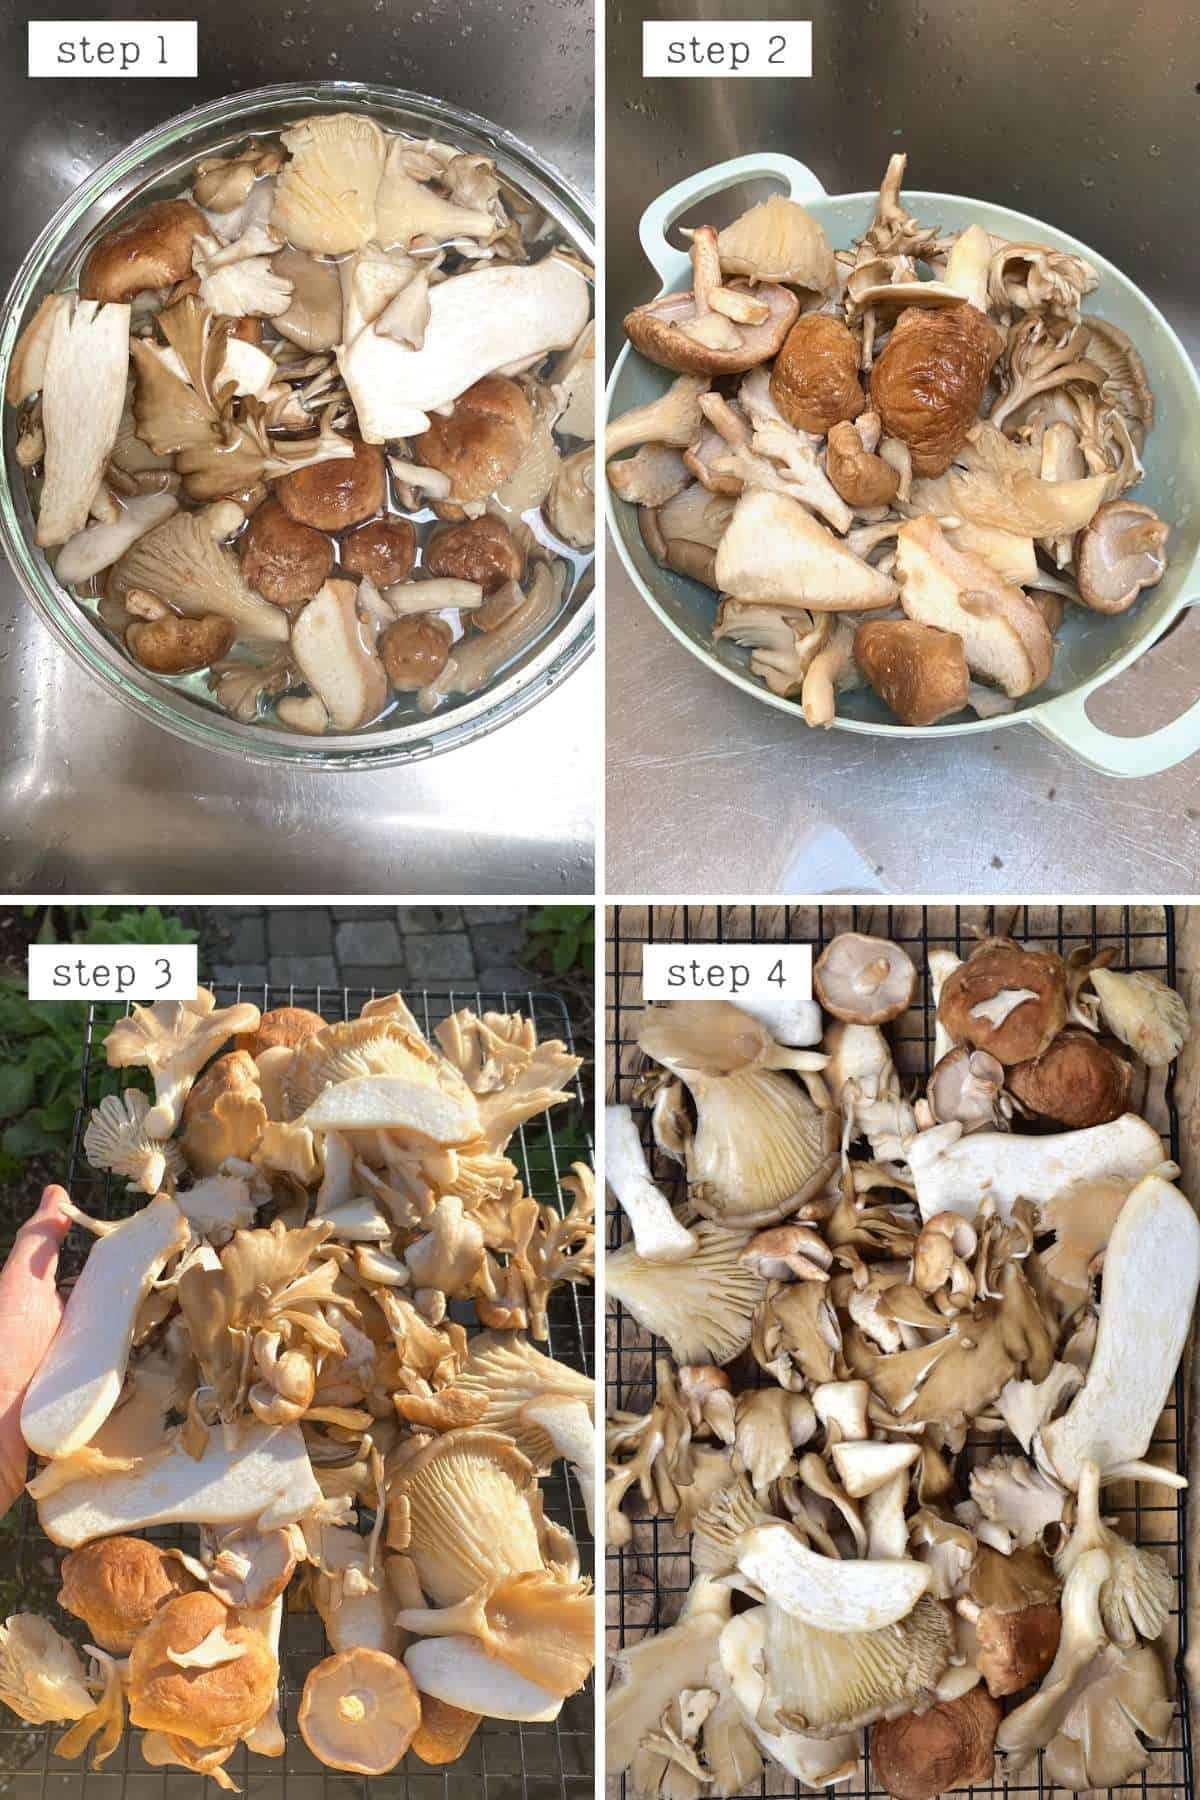 Steps for cleaning mushrooms